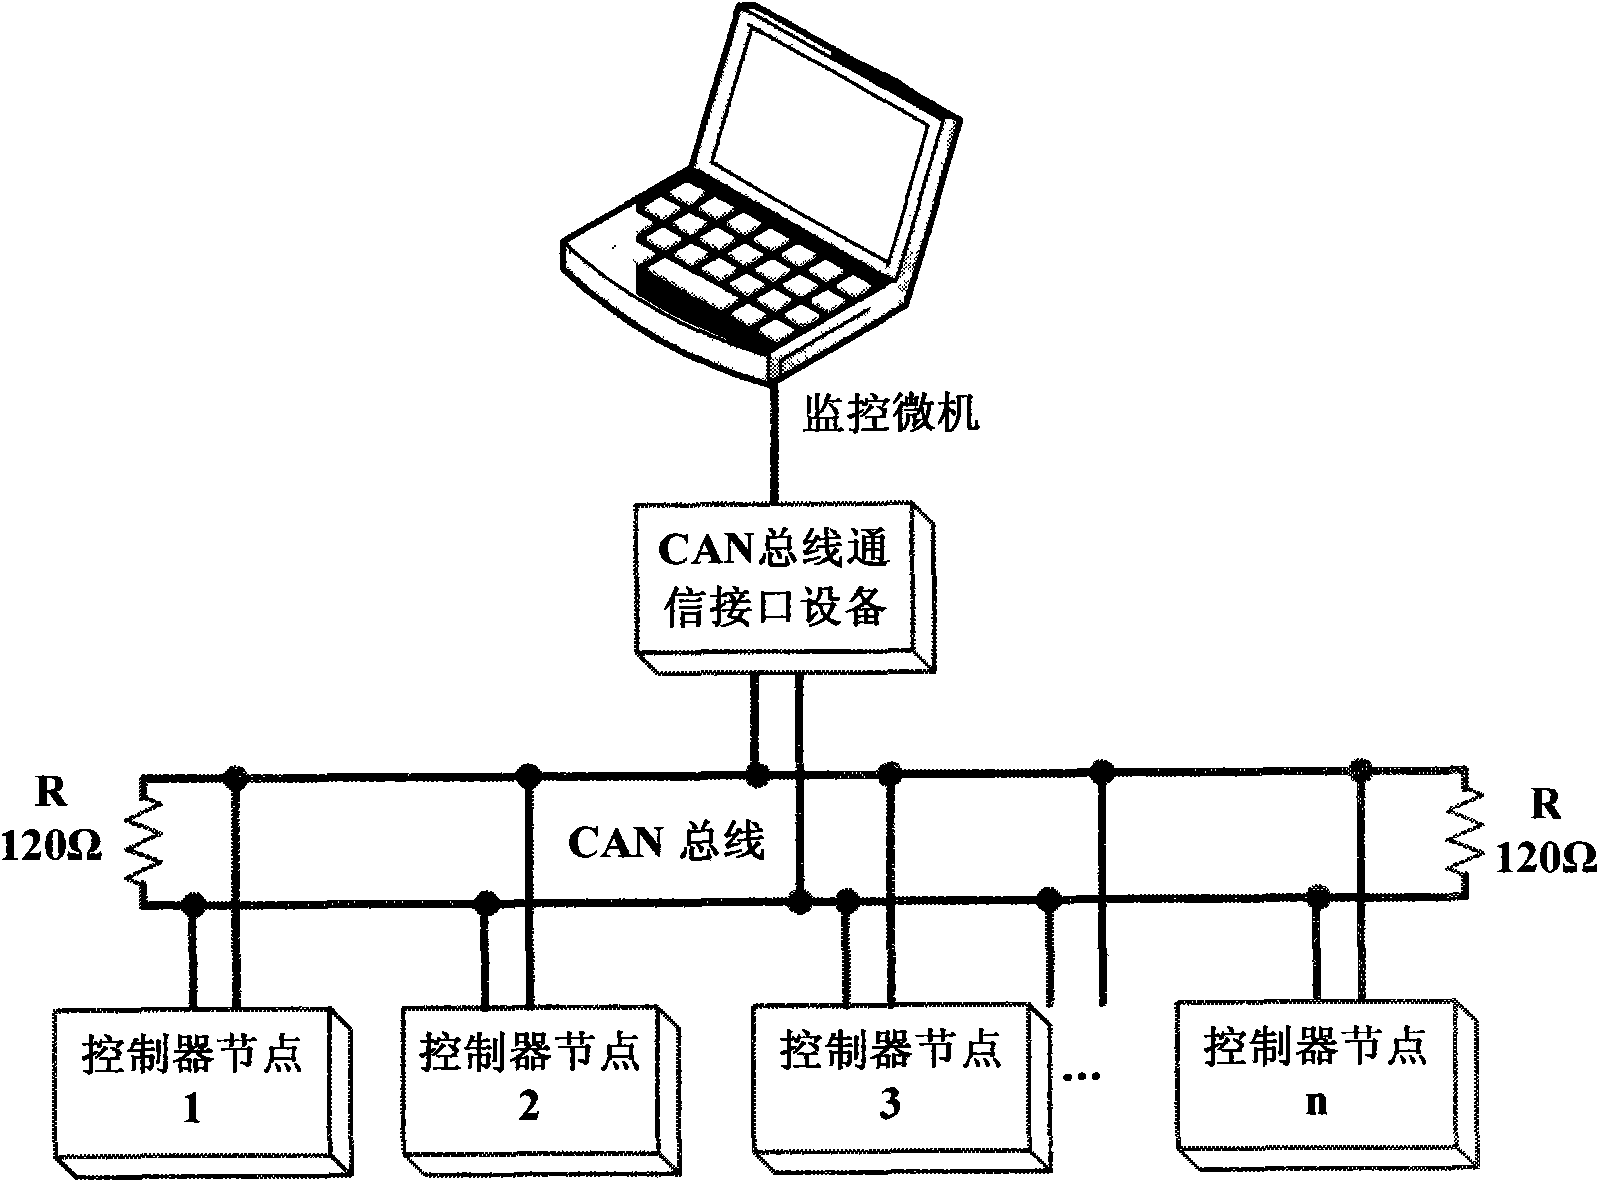 CAN bus based controller network monitoring system and monitoring method